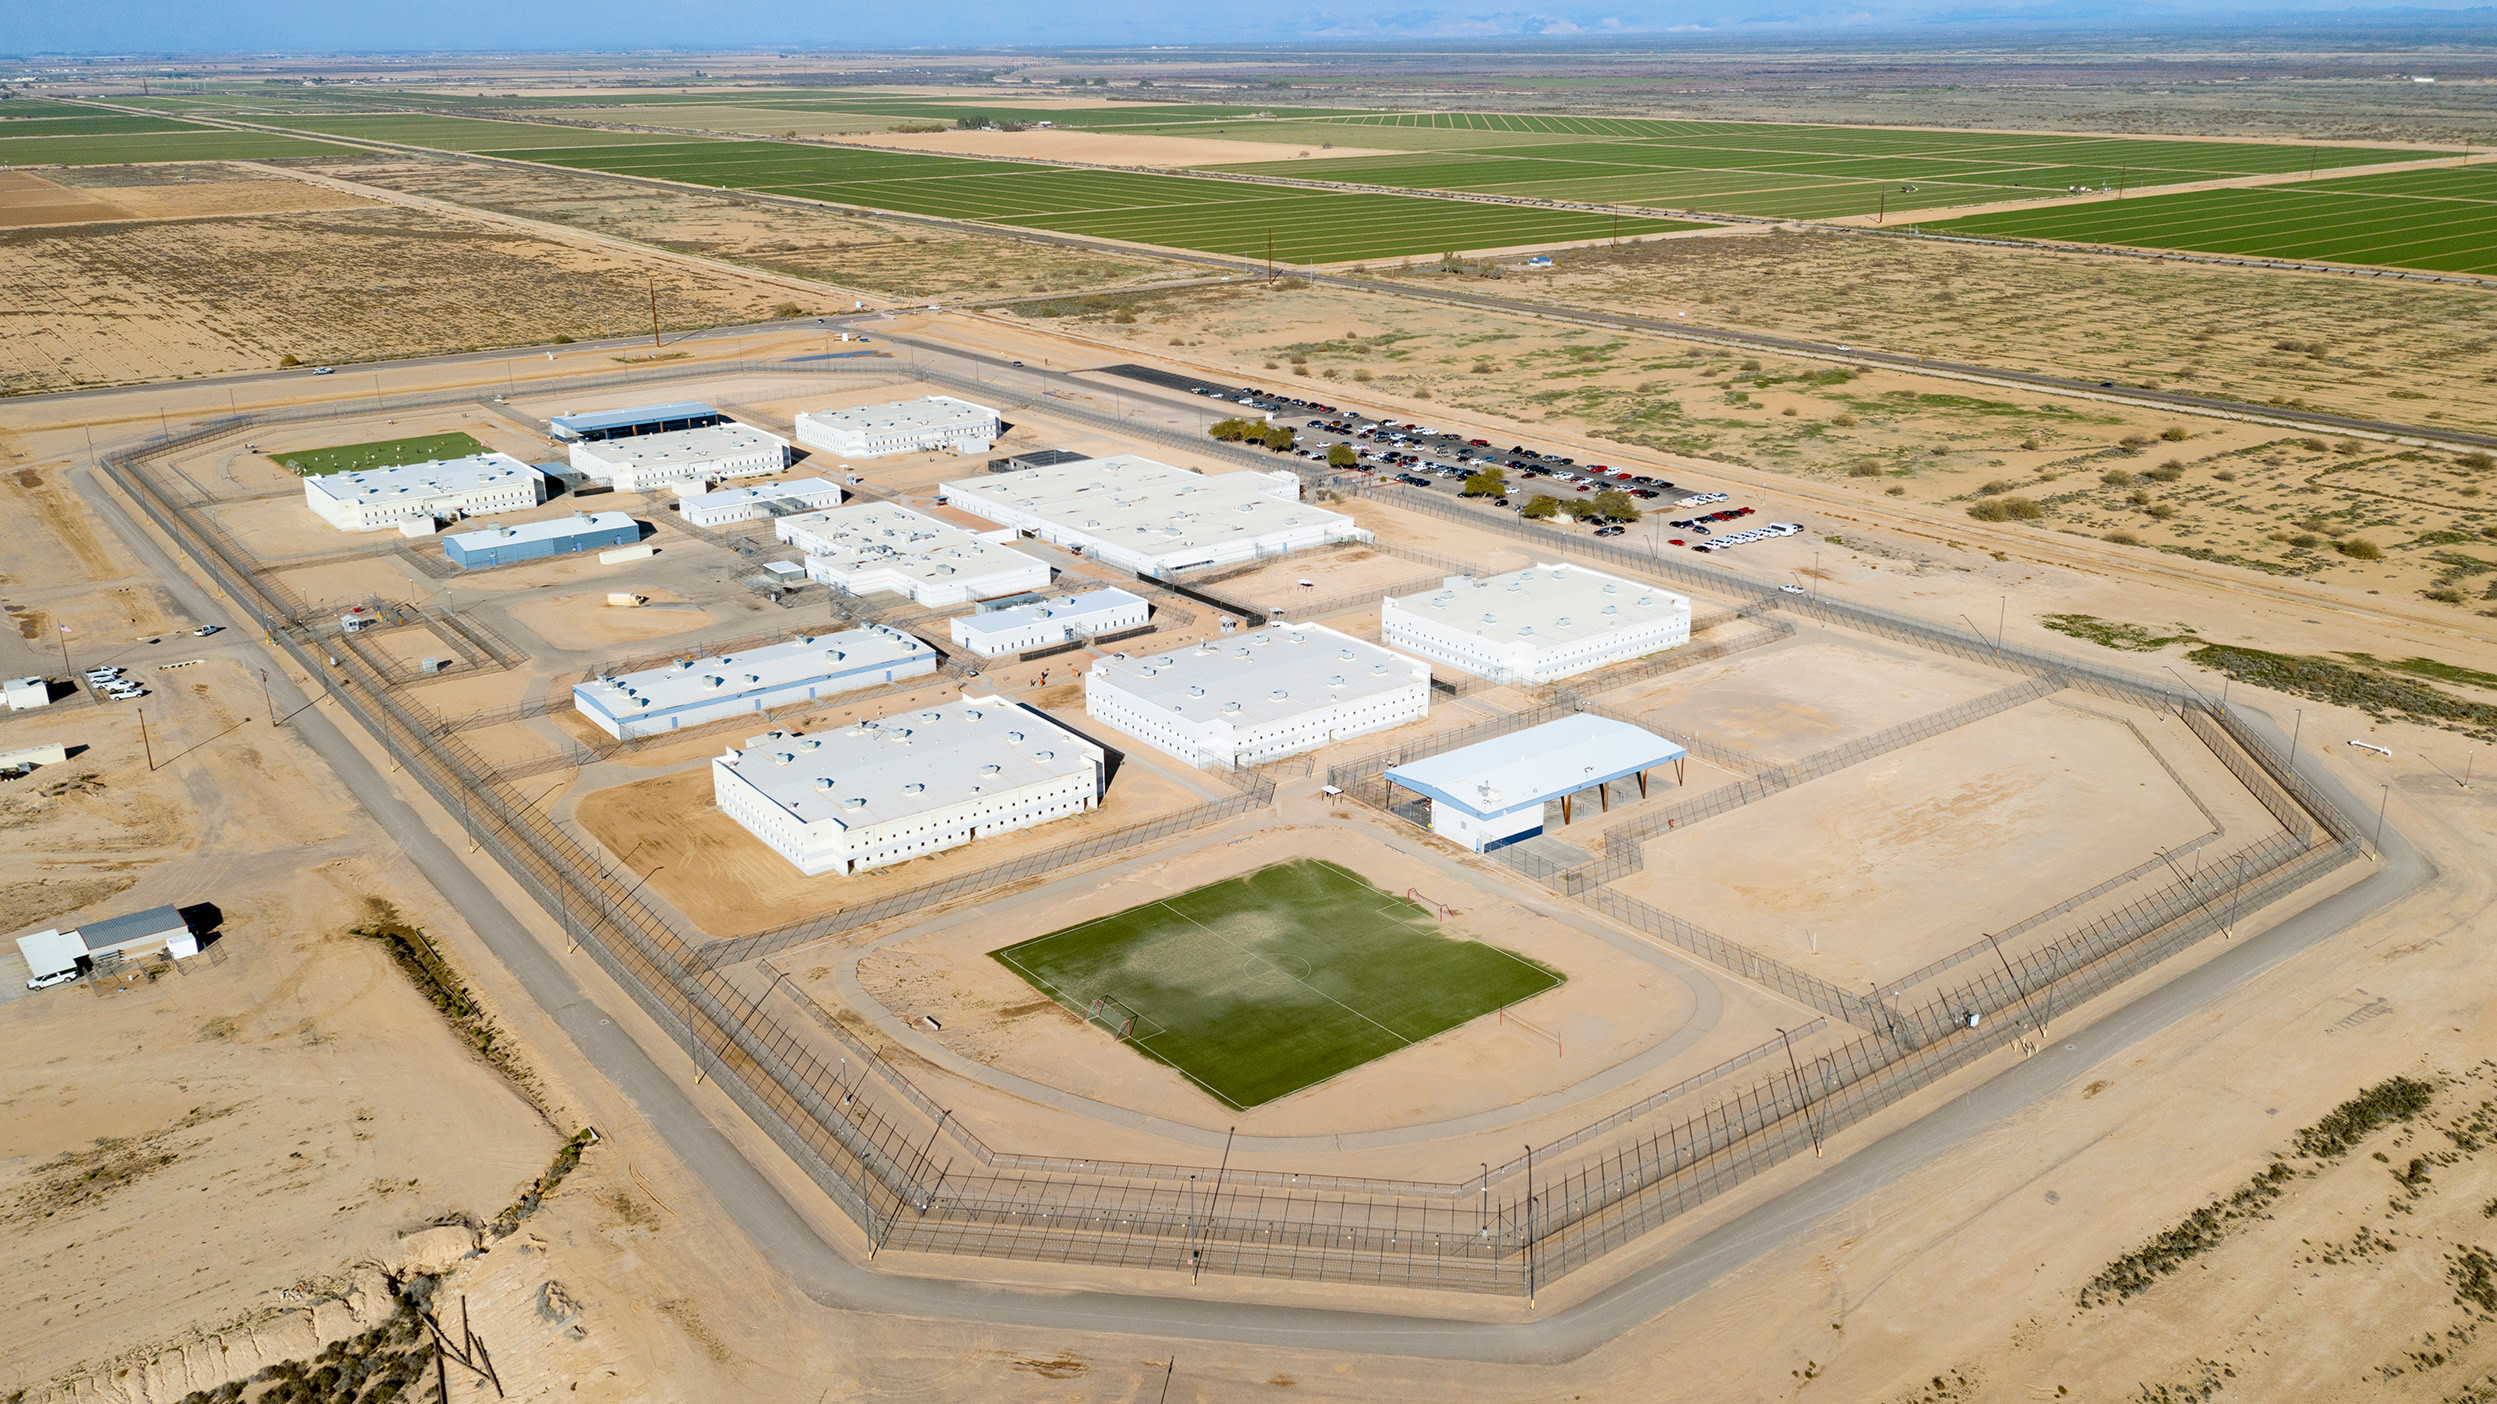 An Artist Used a Drone to Photograph Rarely Seen ICE Detention Centres